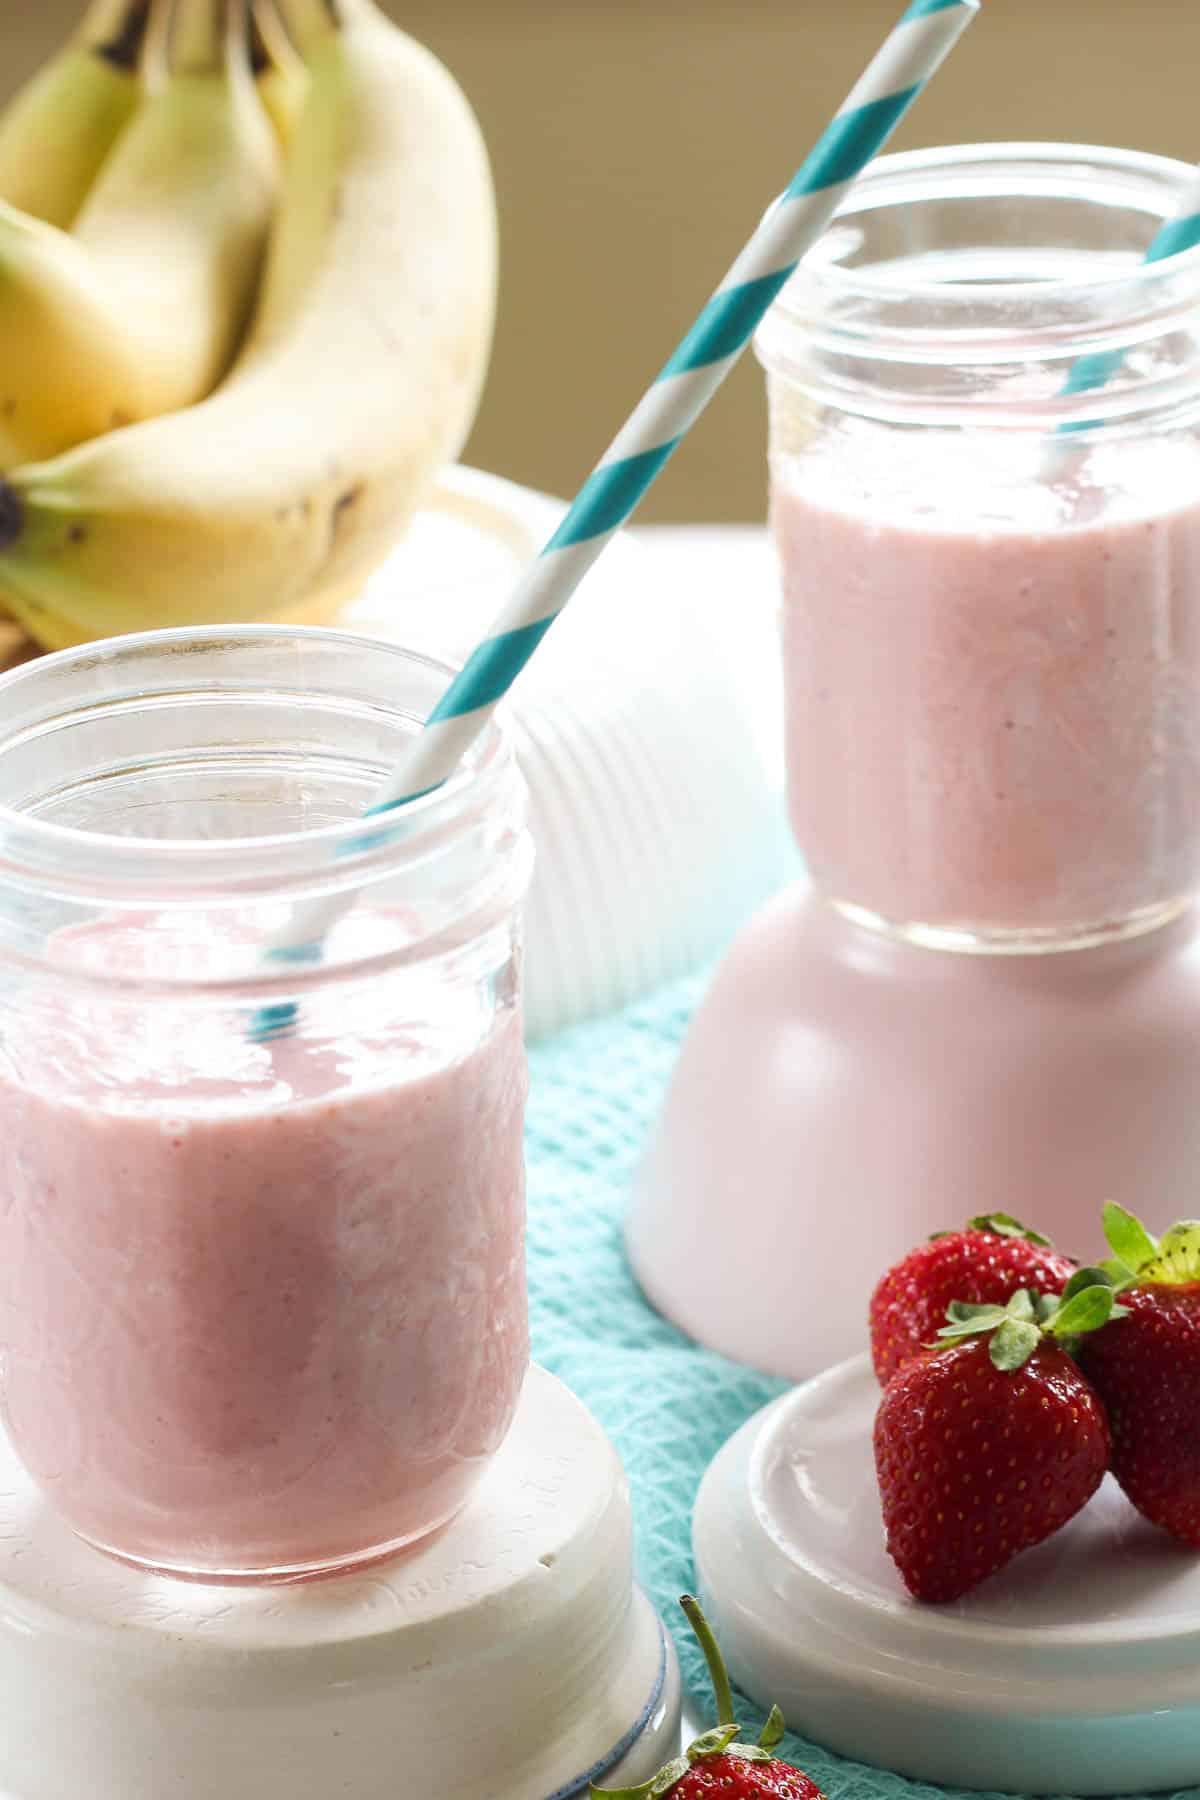 Two glasses of pink smoothie with blue and white strawbs, surrounded by strawberries and bananas and blue cloth